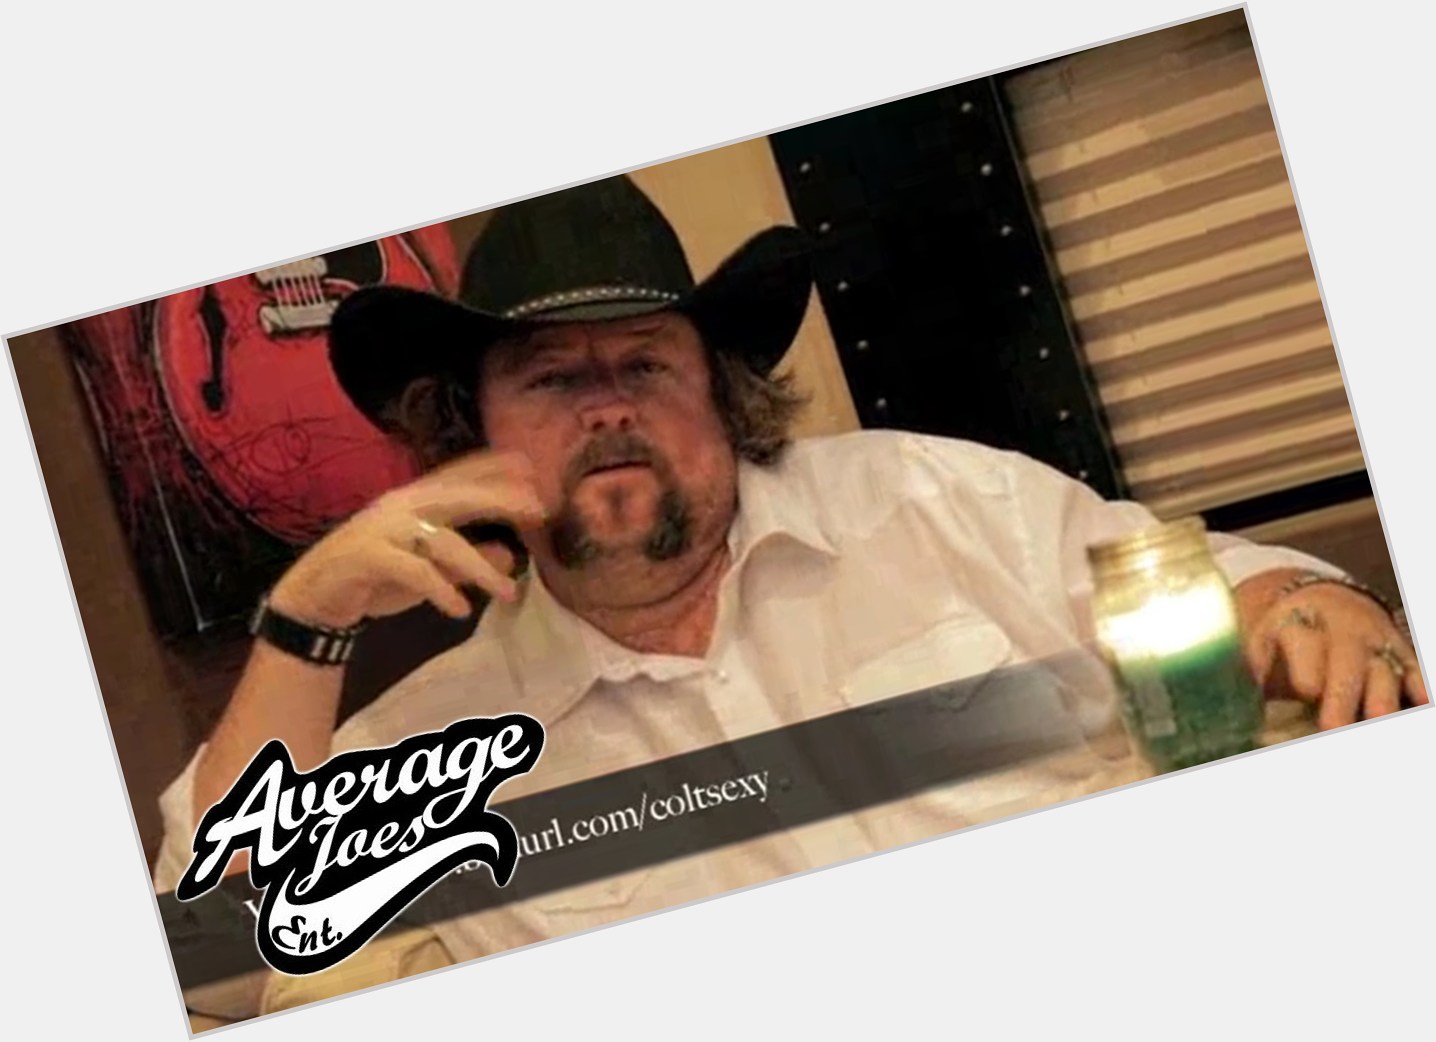 <a href="/hot-men/colt-ford/is-he-married-christian-black-or-white-redneck">Colt Ford</a> Large body,  dark brown hair & hairstyles